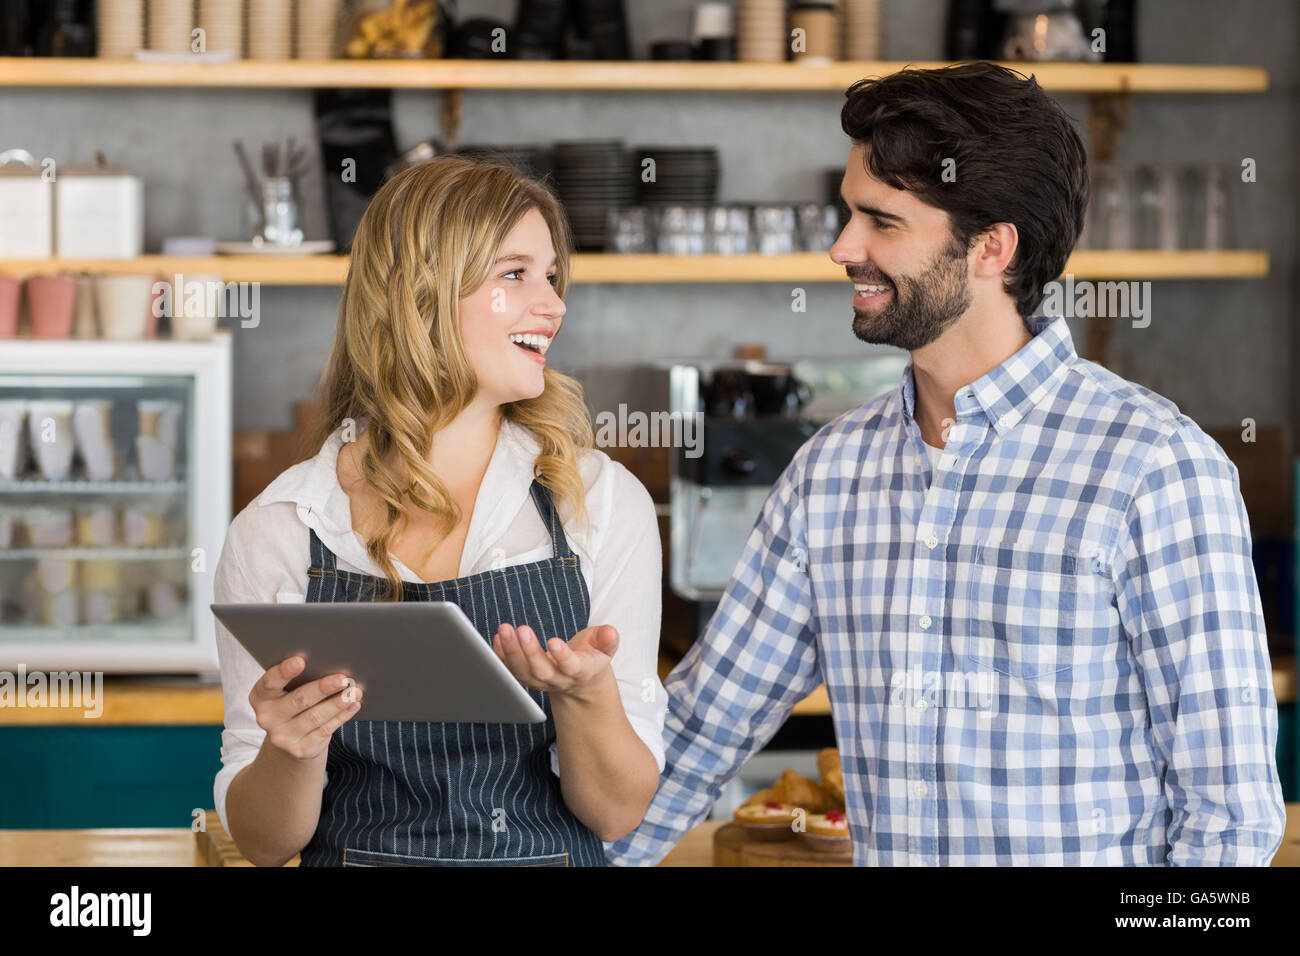 Smiling man and waitress standing at counter using digital tablet Stock Photo